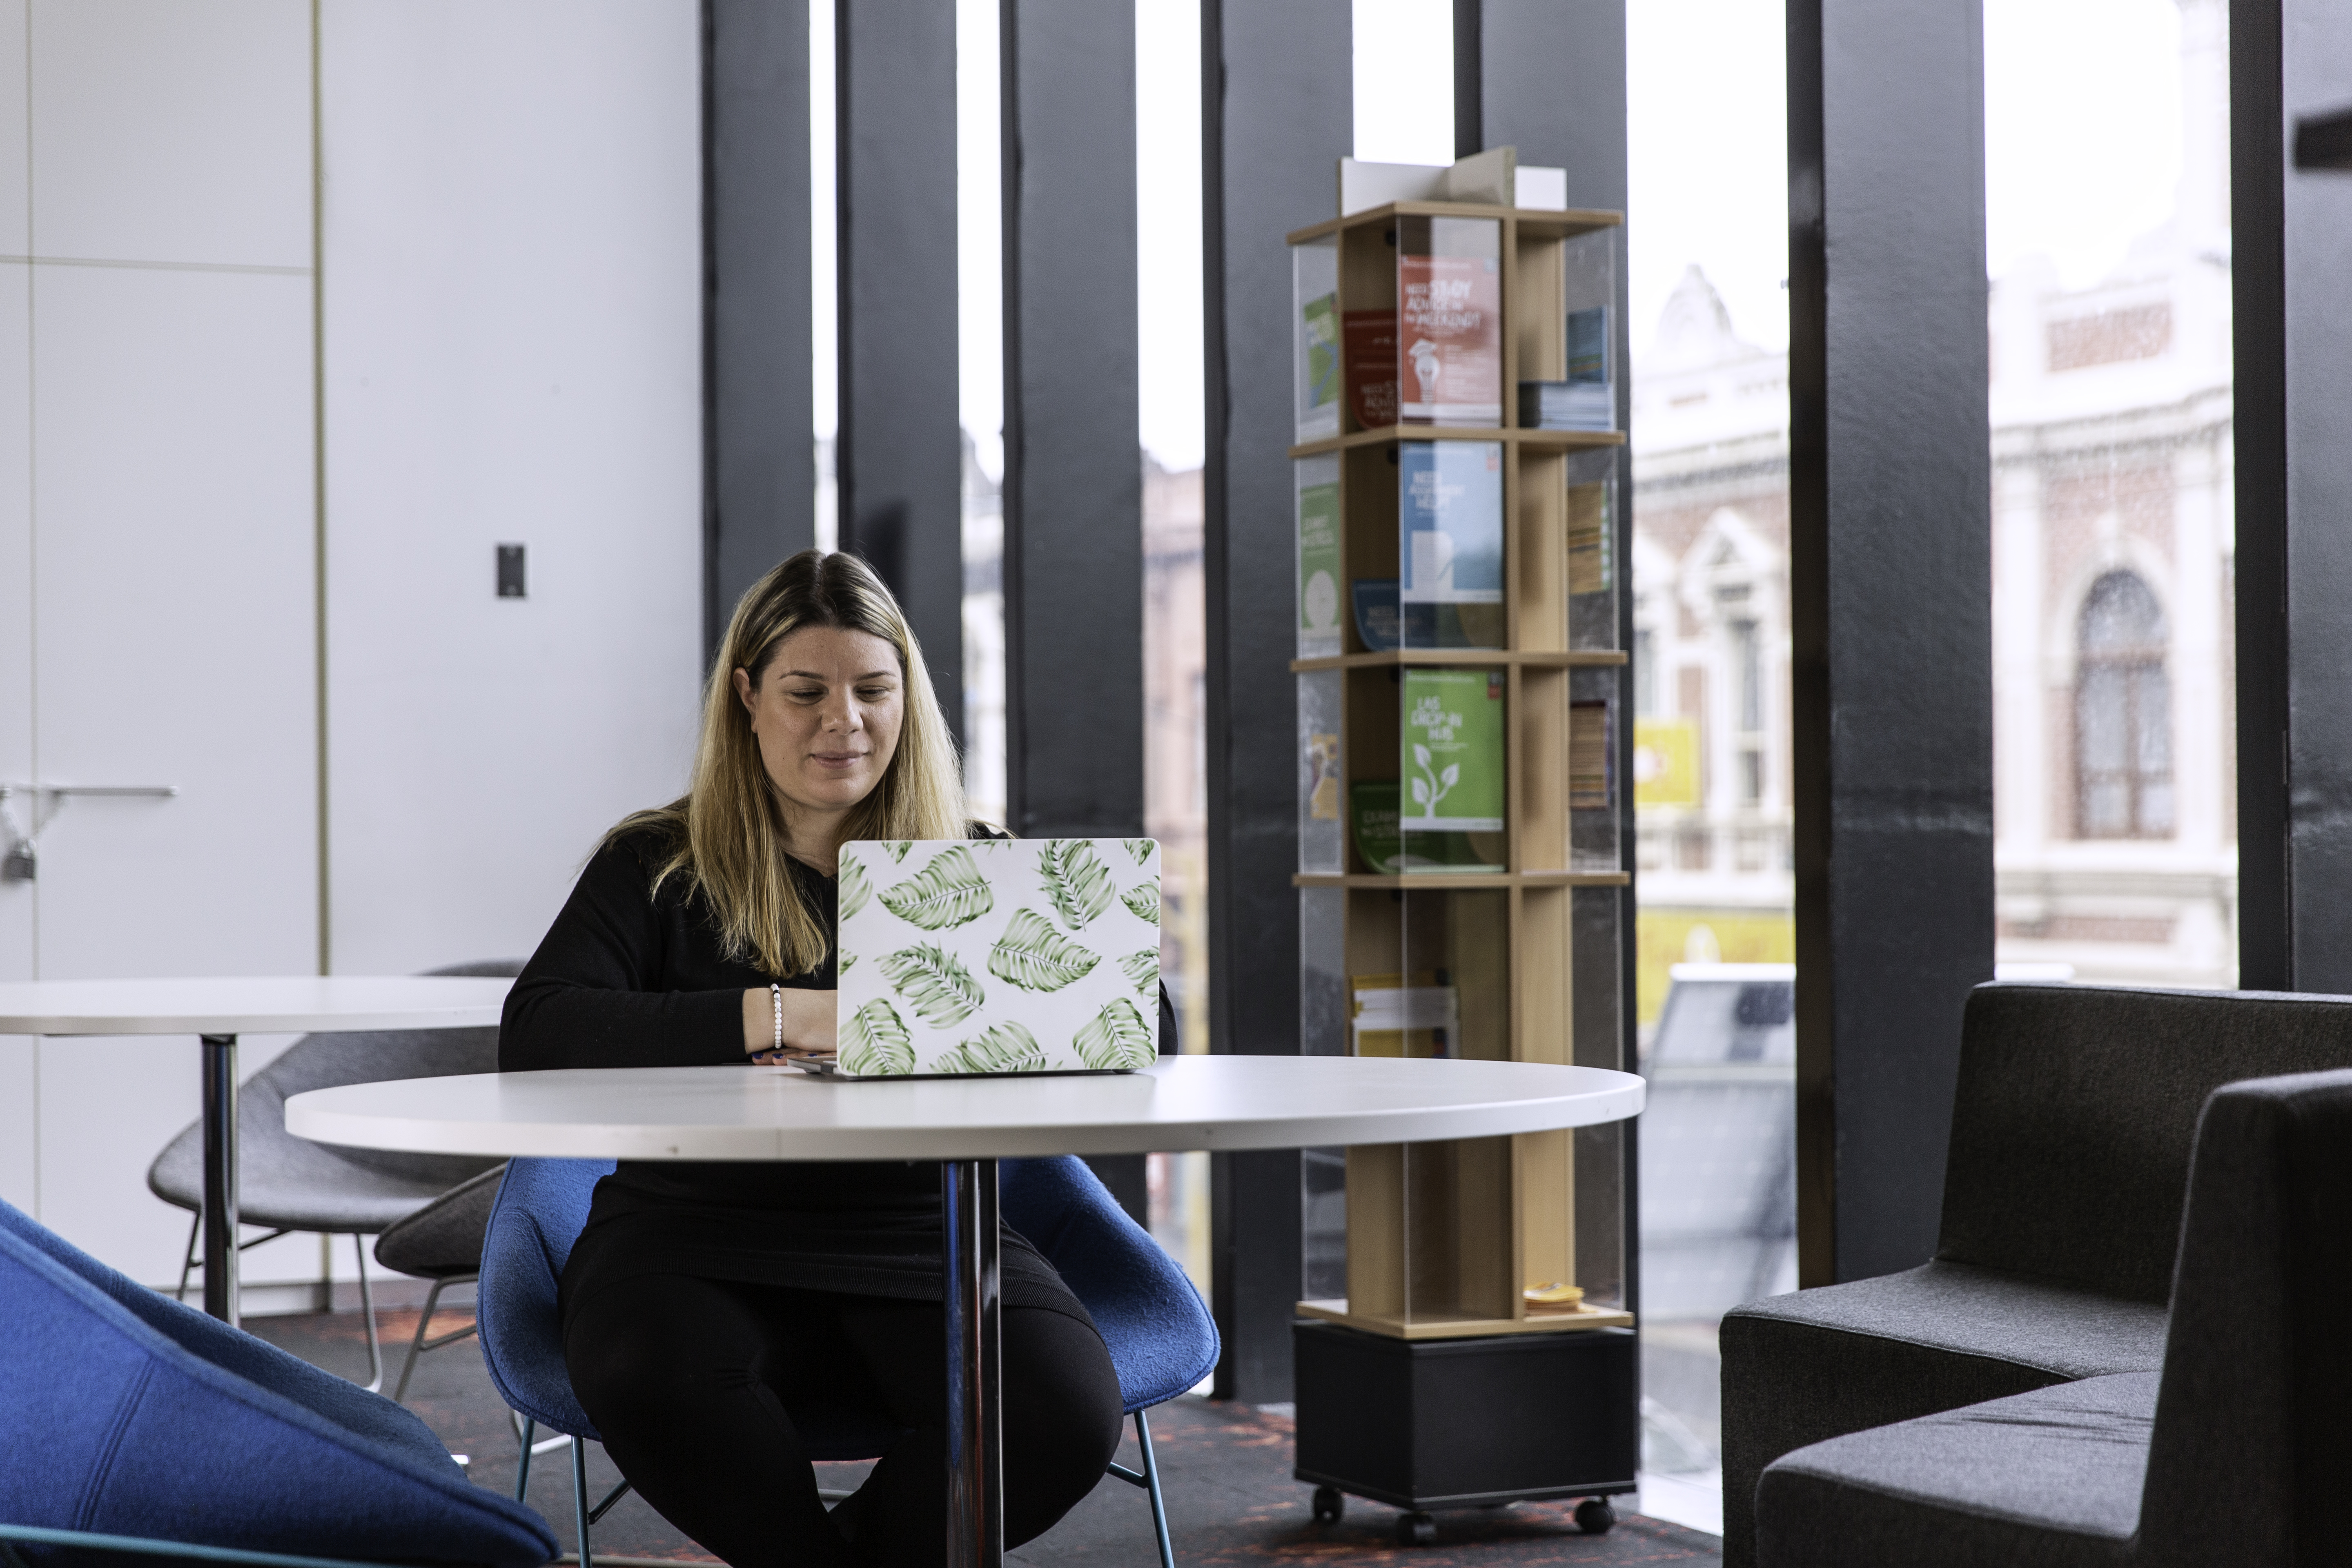 A Blonde woman wearing black, works at a laptop at one of Swinburne's various study spaces